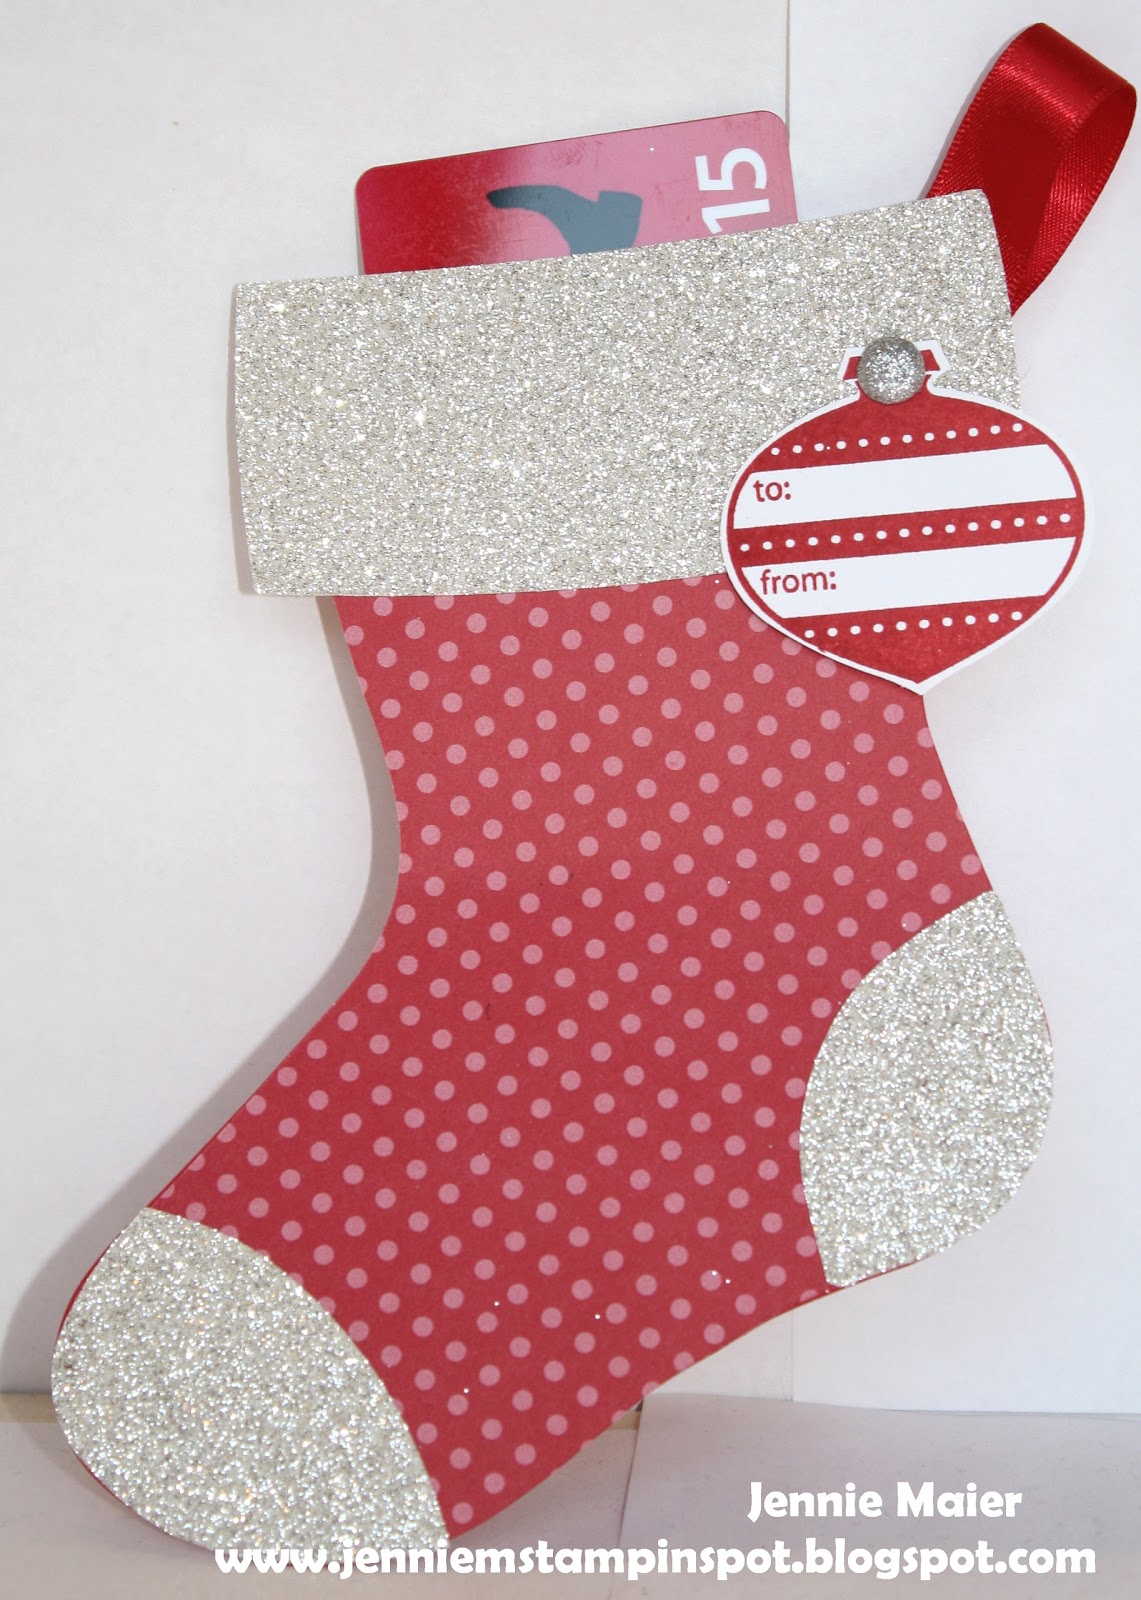 Jennie M's Stampin Spot: Holiday Stocking Gift Card Holder